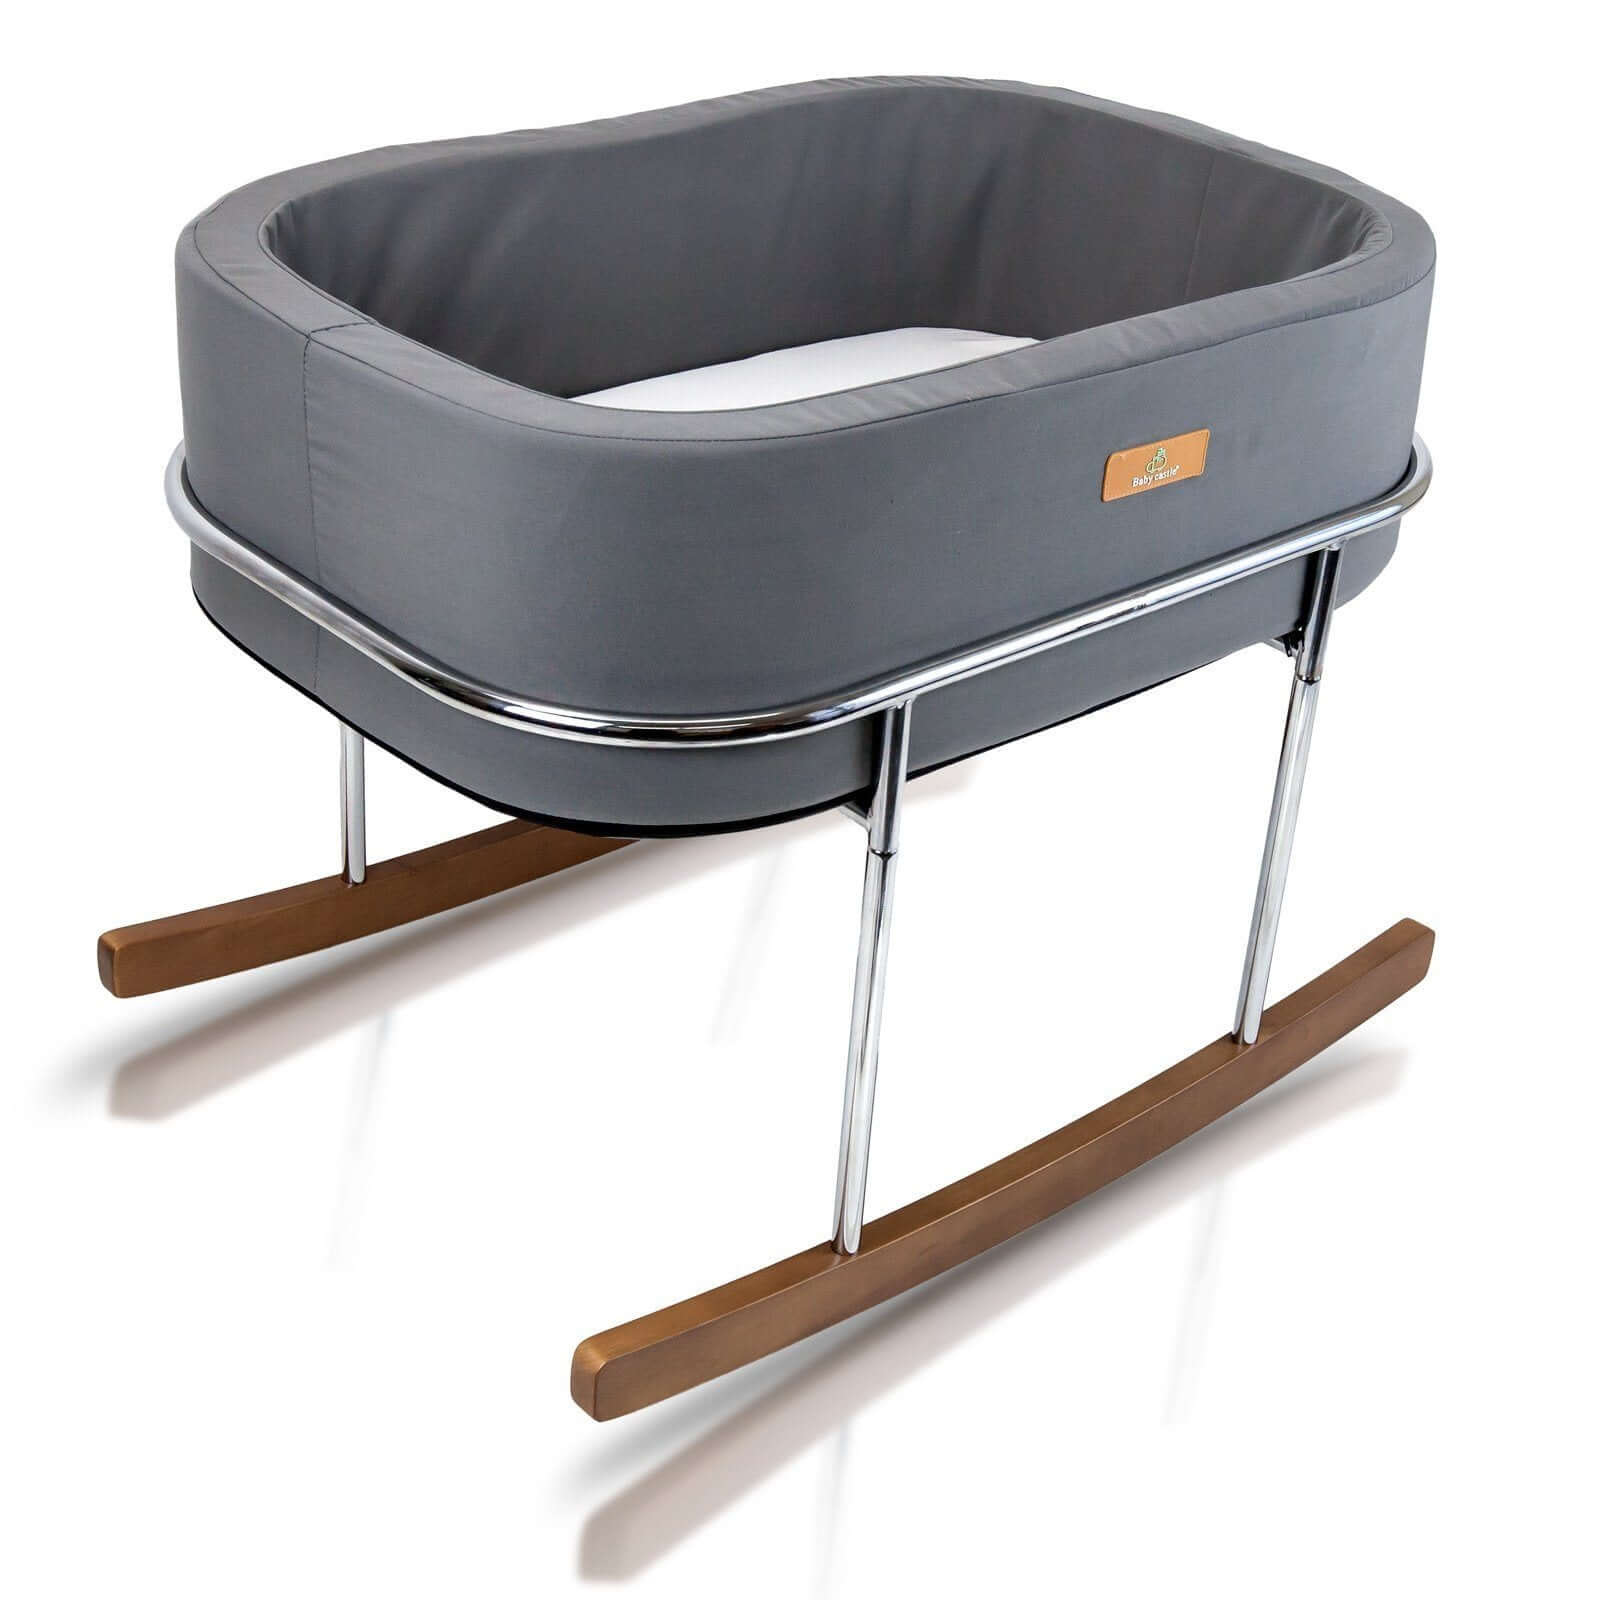 Modern Design Baby Bassinet Cradle with Gentle Rocking Feature (Gray)